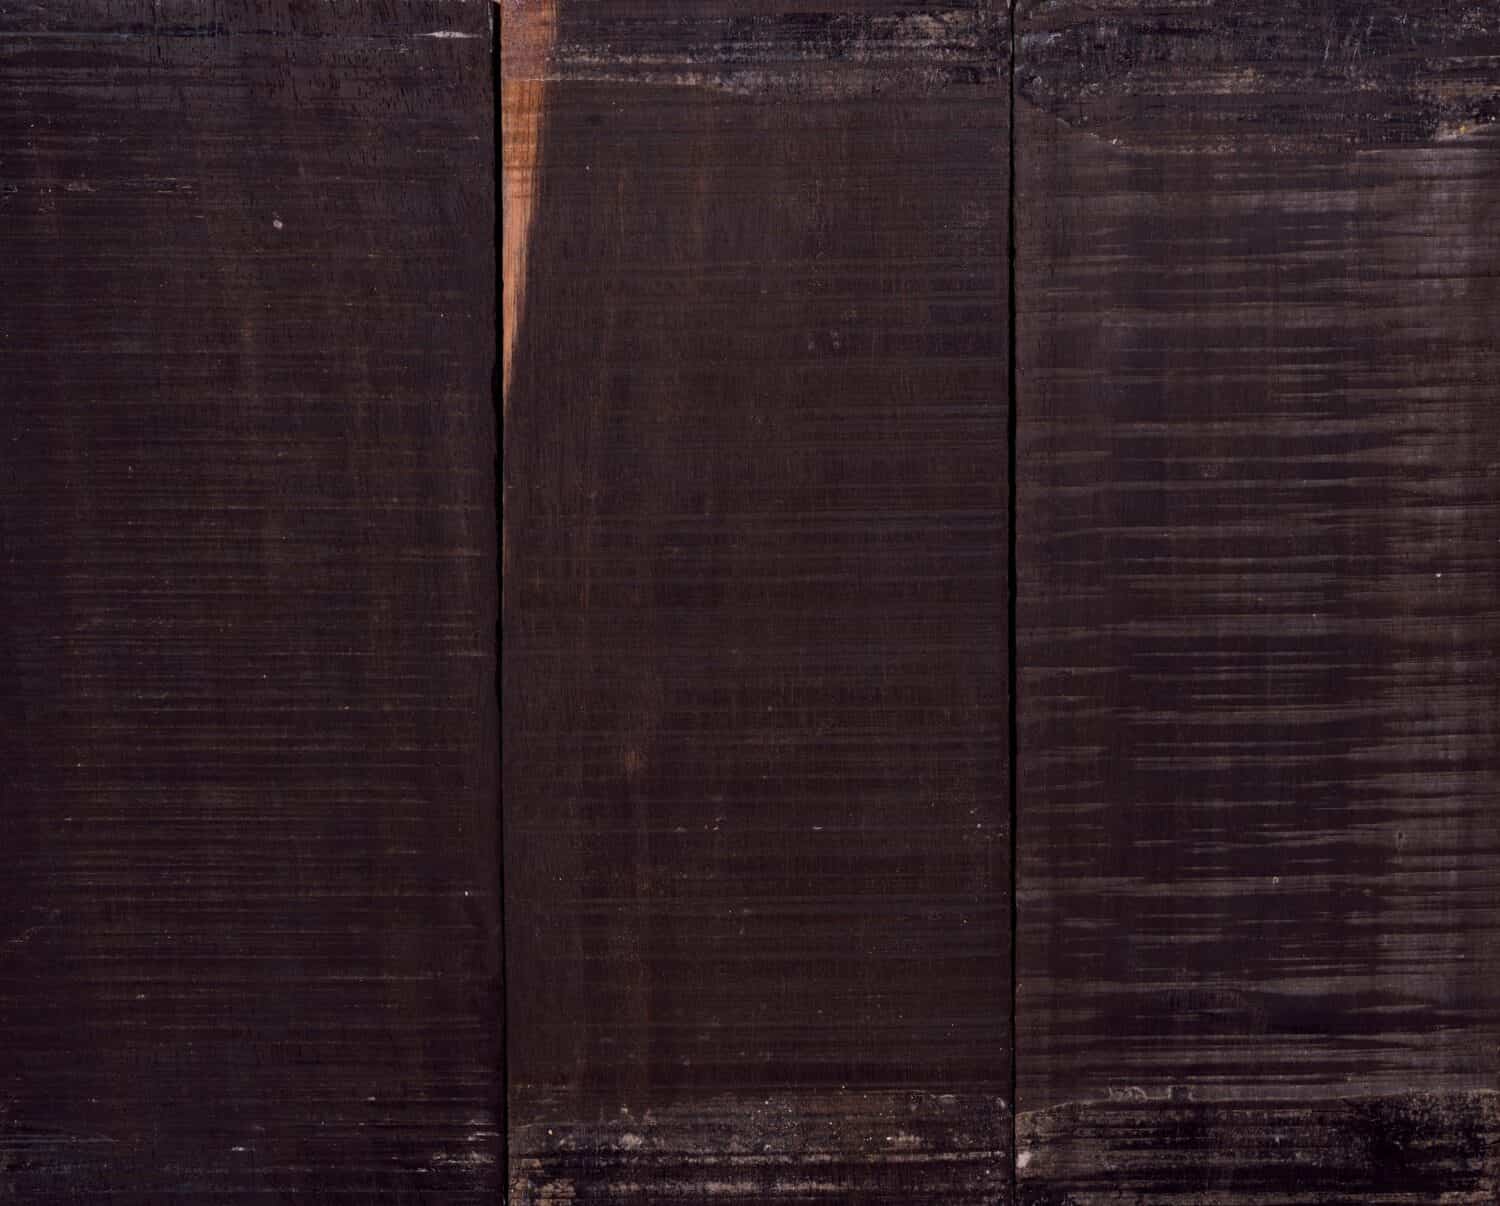 Rought split Ebony from Eastern Africa. The color sample of Diospyros crassiflora hiern are from an FSC Managed Forest and are certified. Ebony is used to make musical instruments and guitars.